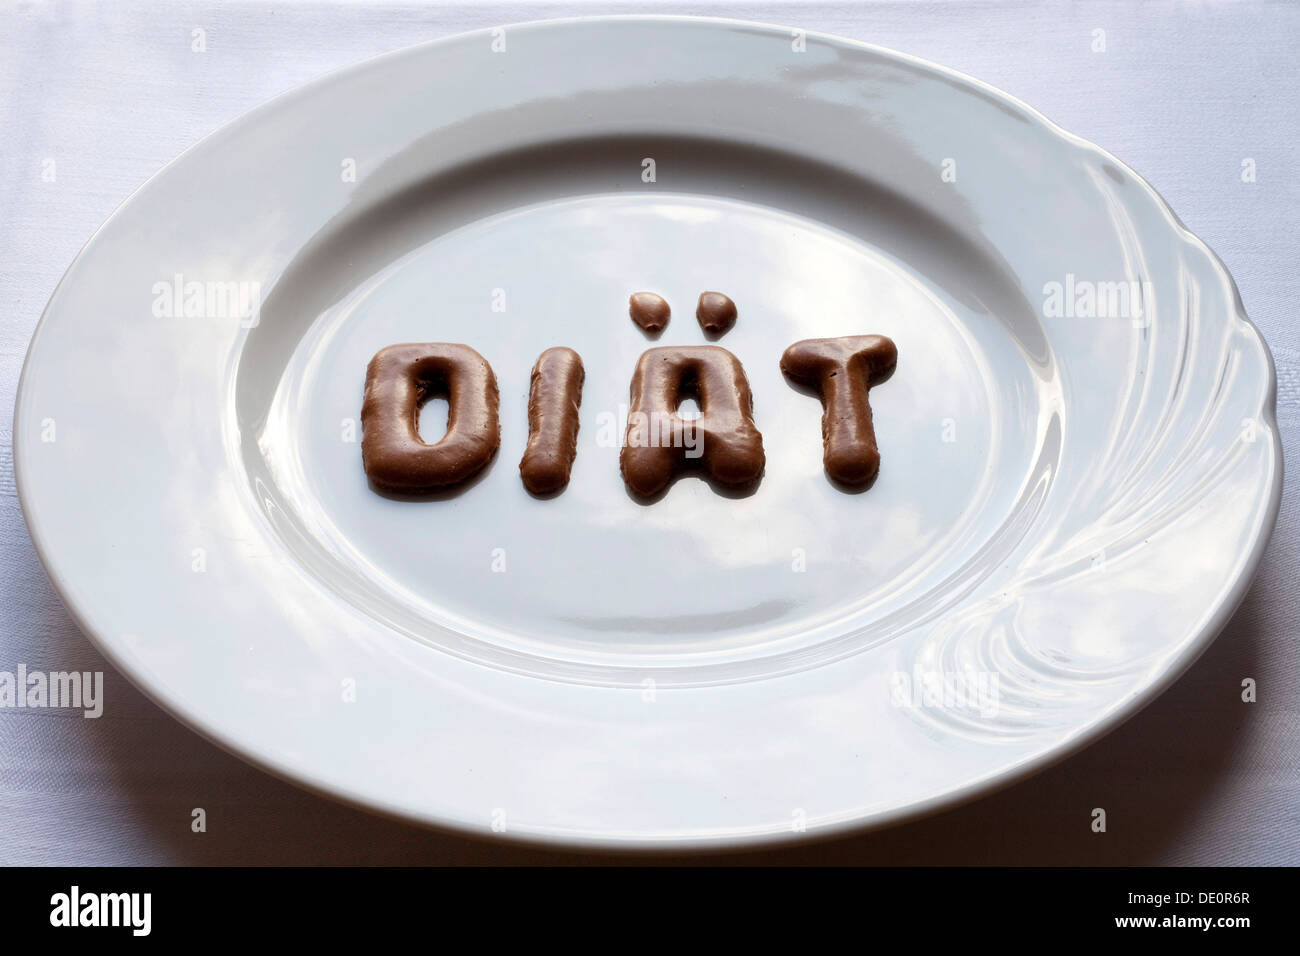 Letters forming the word 'diaet', German for 'diet' made from Russian bread on a white plate Stock Photo